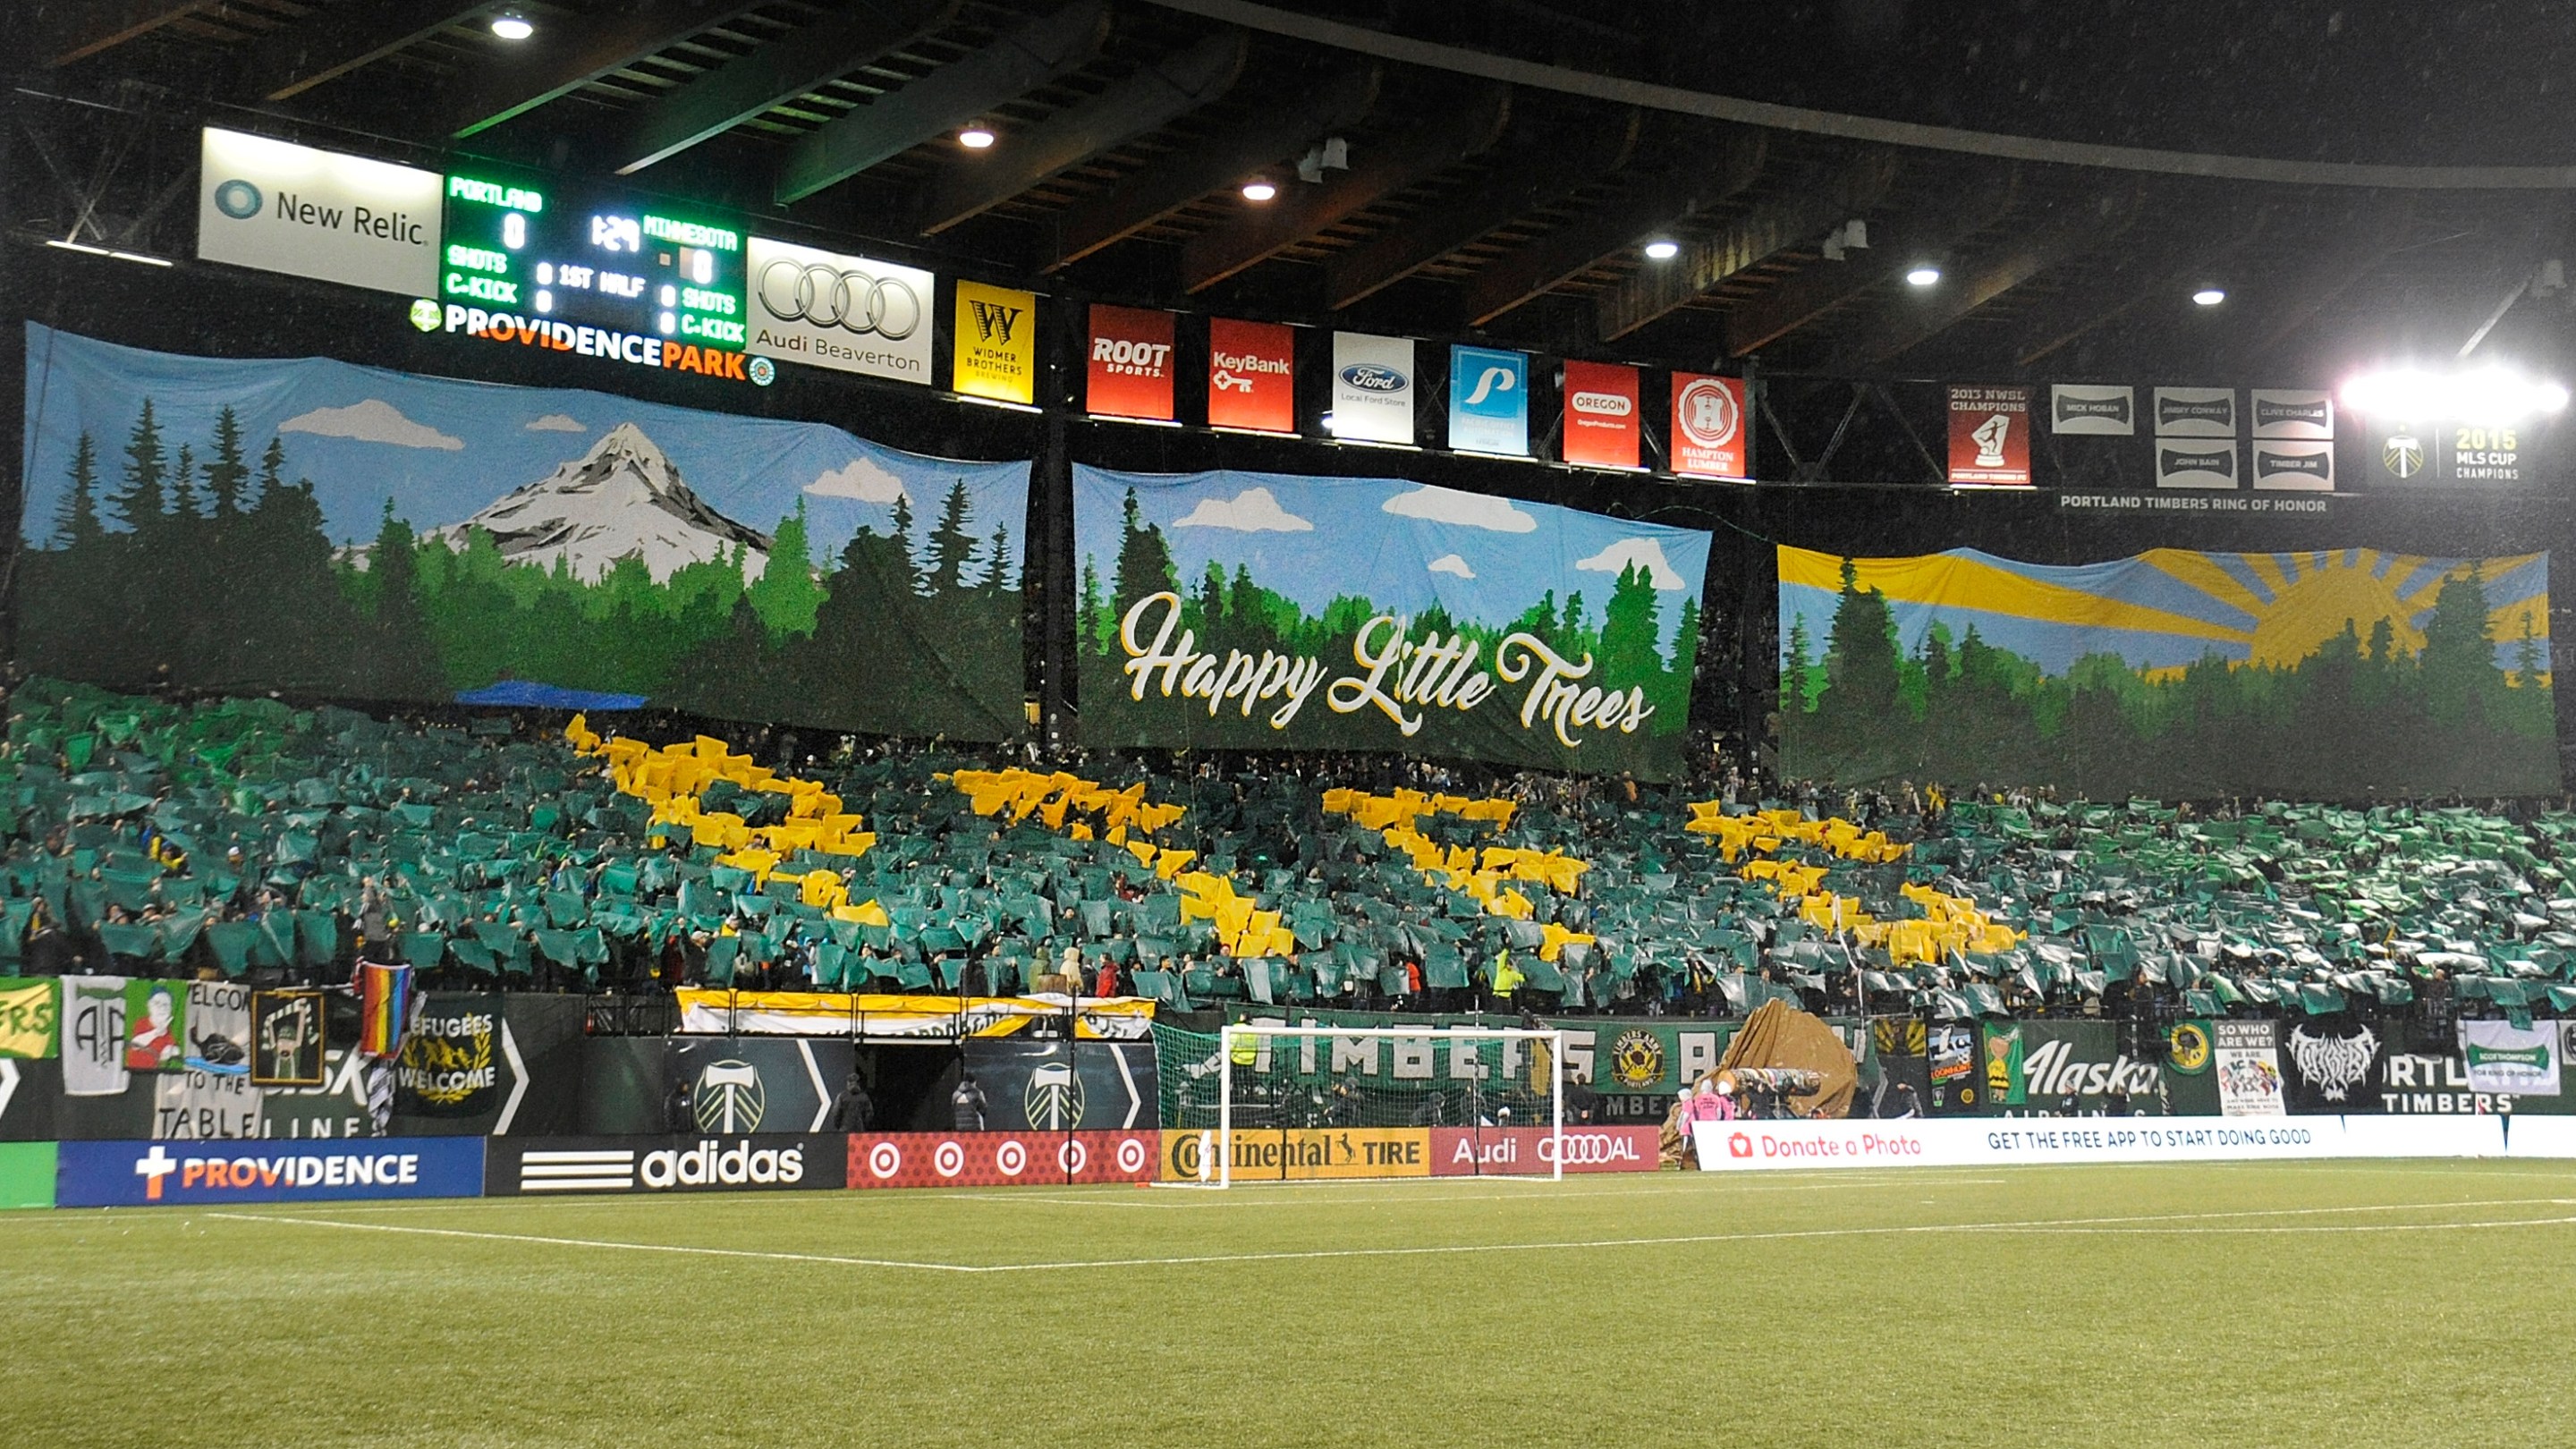 Portland Timbers fans hold up a tifo before their match against the Minnesota United at Providence Park on March 3, 2017 in Portland, Oregon.